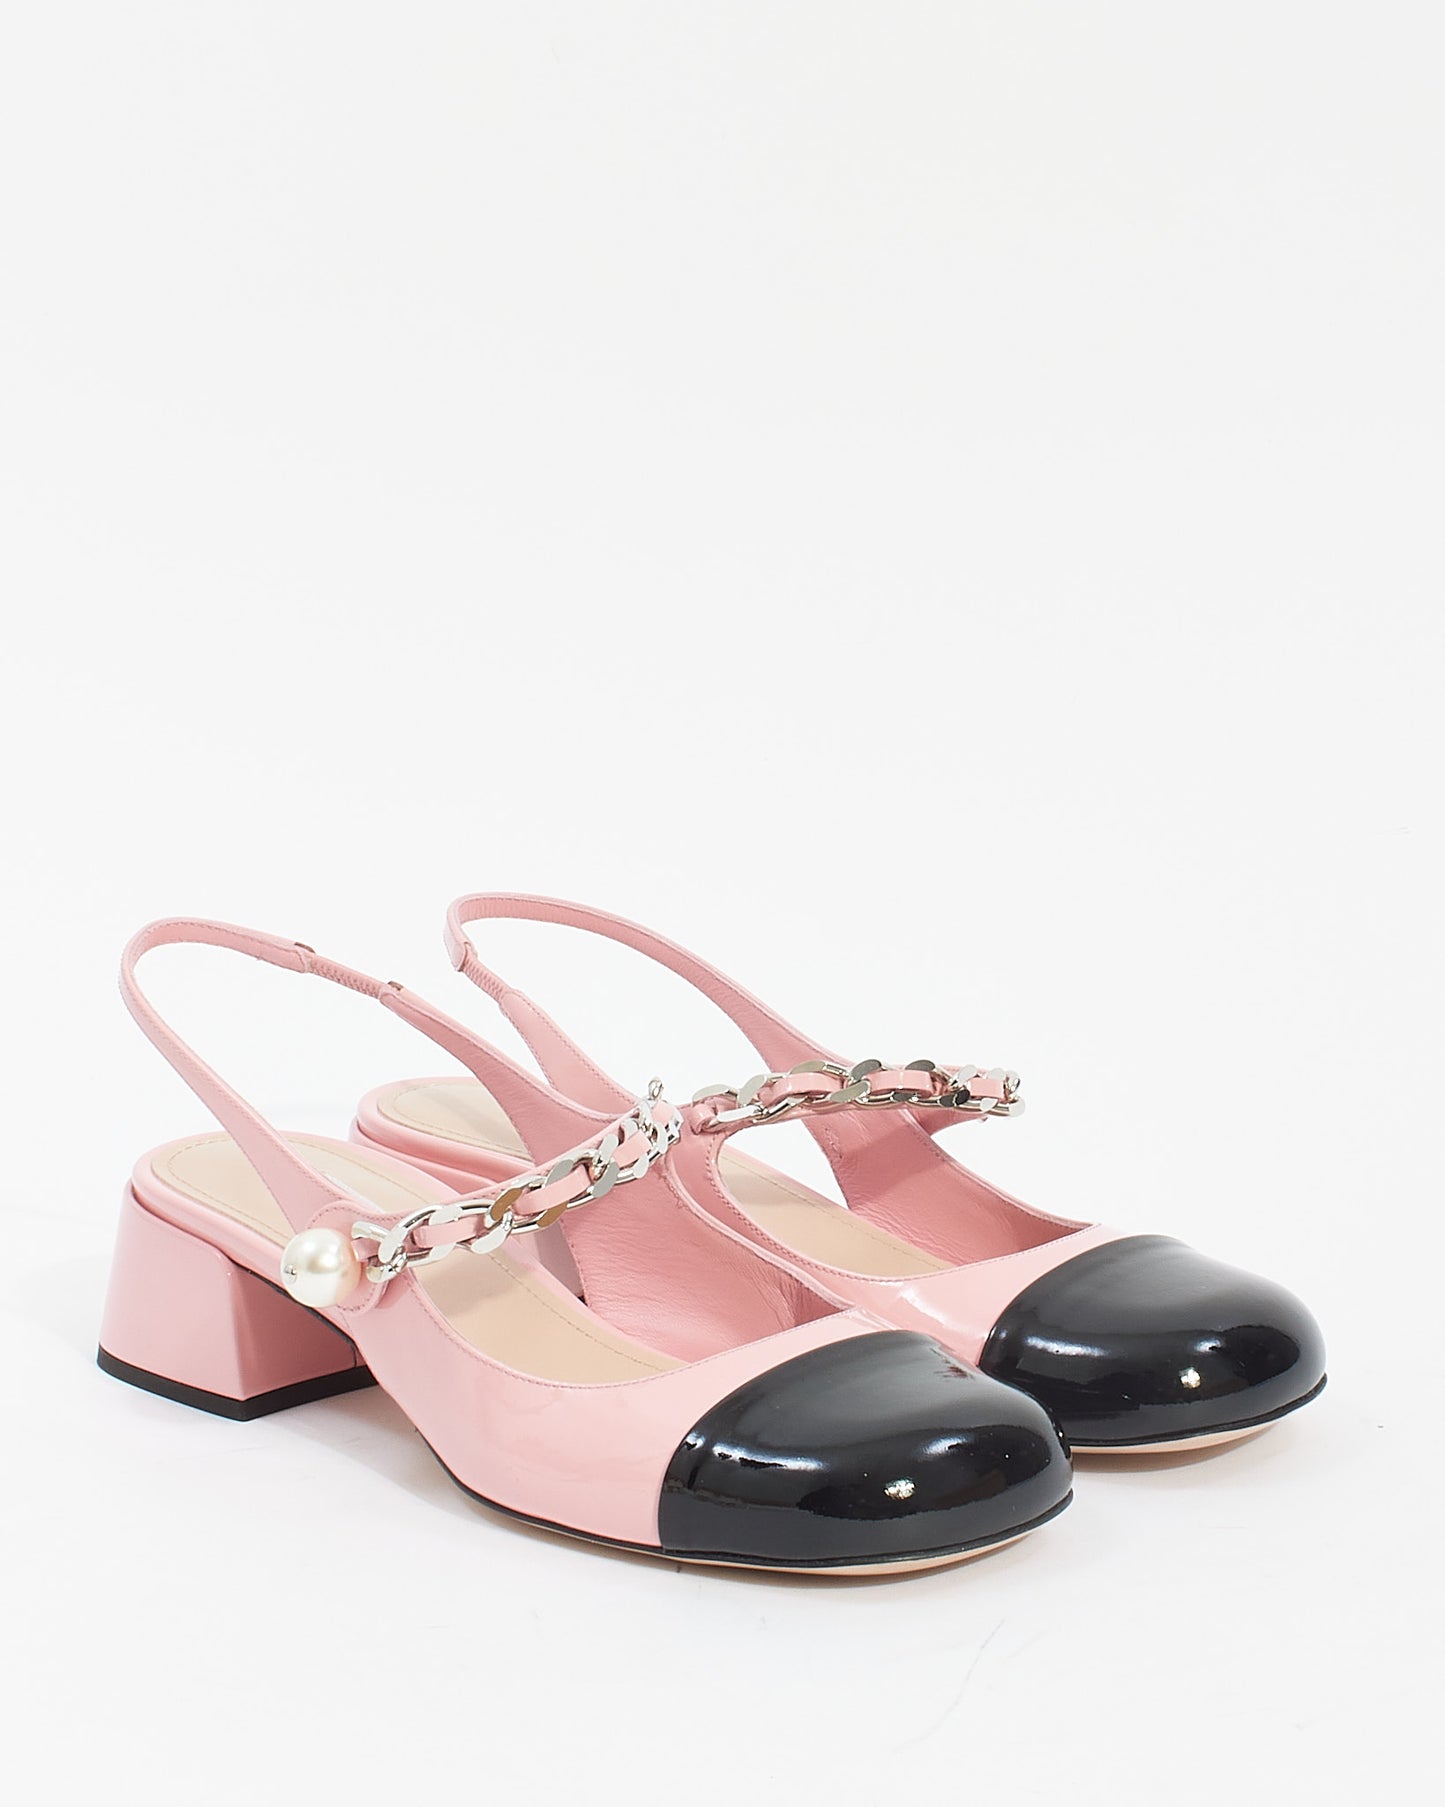 Miu Miu Pink Patent Leather Mary Jane Pumps With Pearl Strap -38